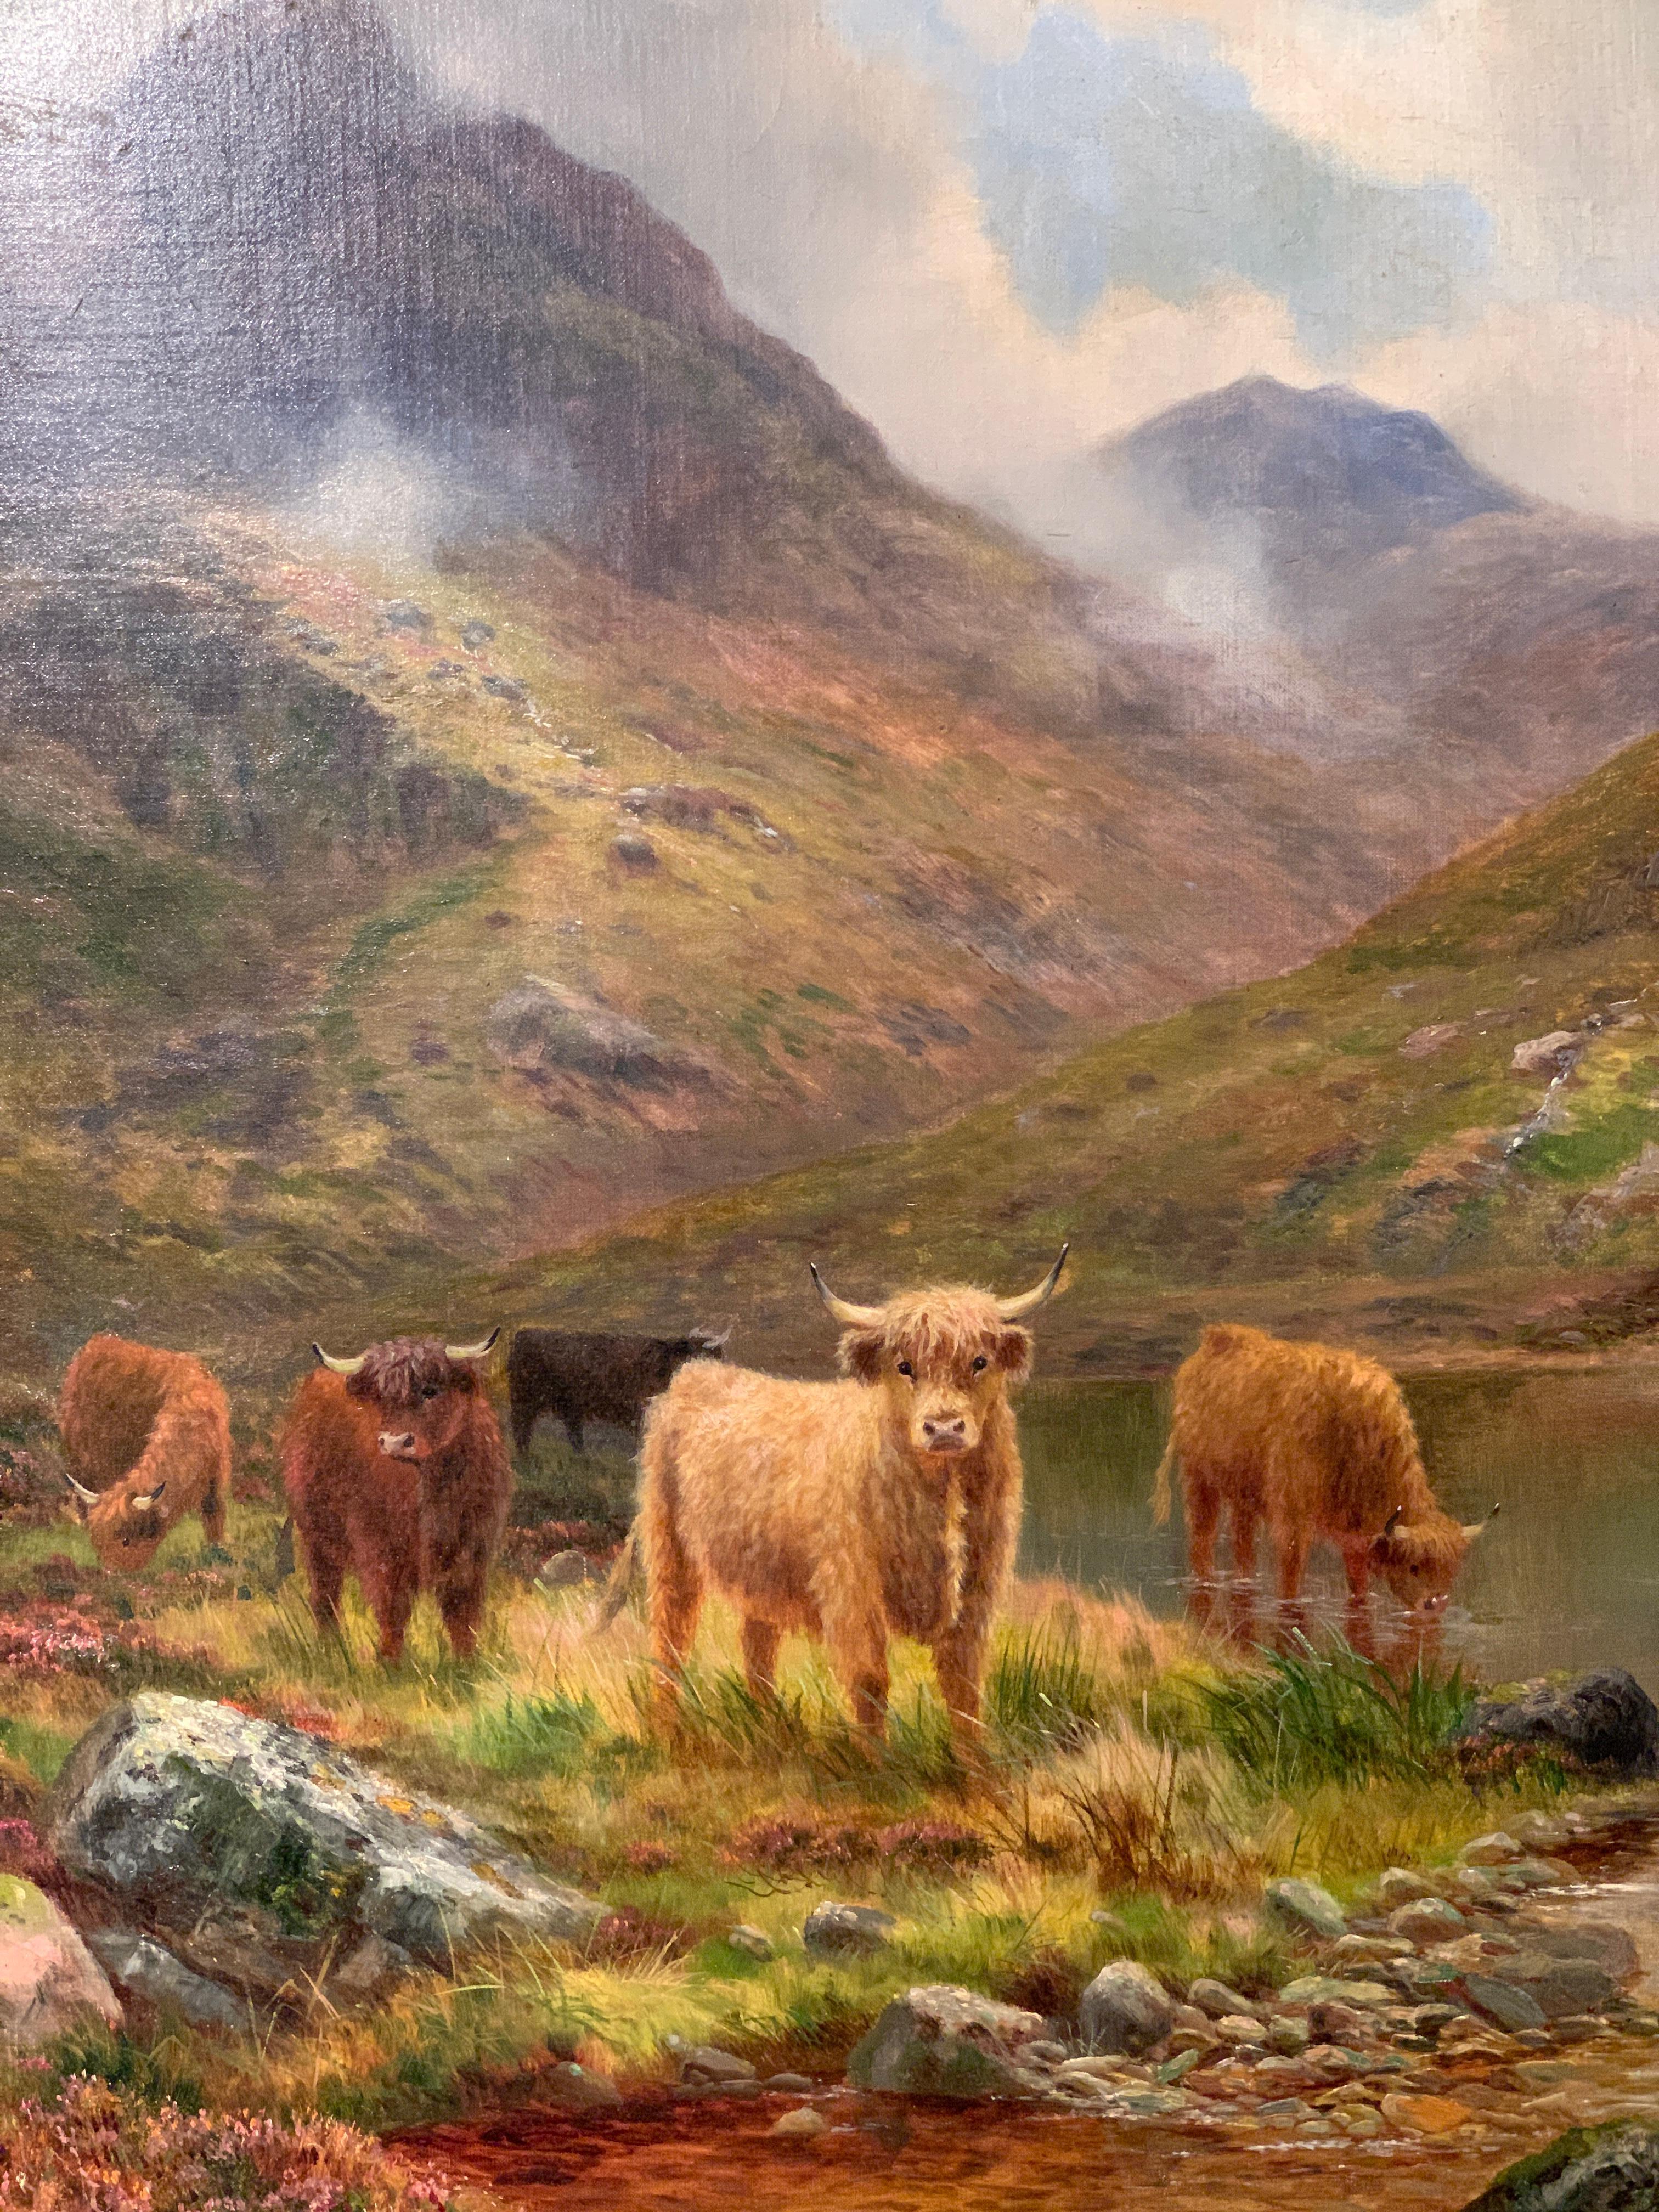 19thc Scottish landscape scene with woolly Cows and Bulls in the highlands - Painting by Daniel Sherrin